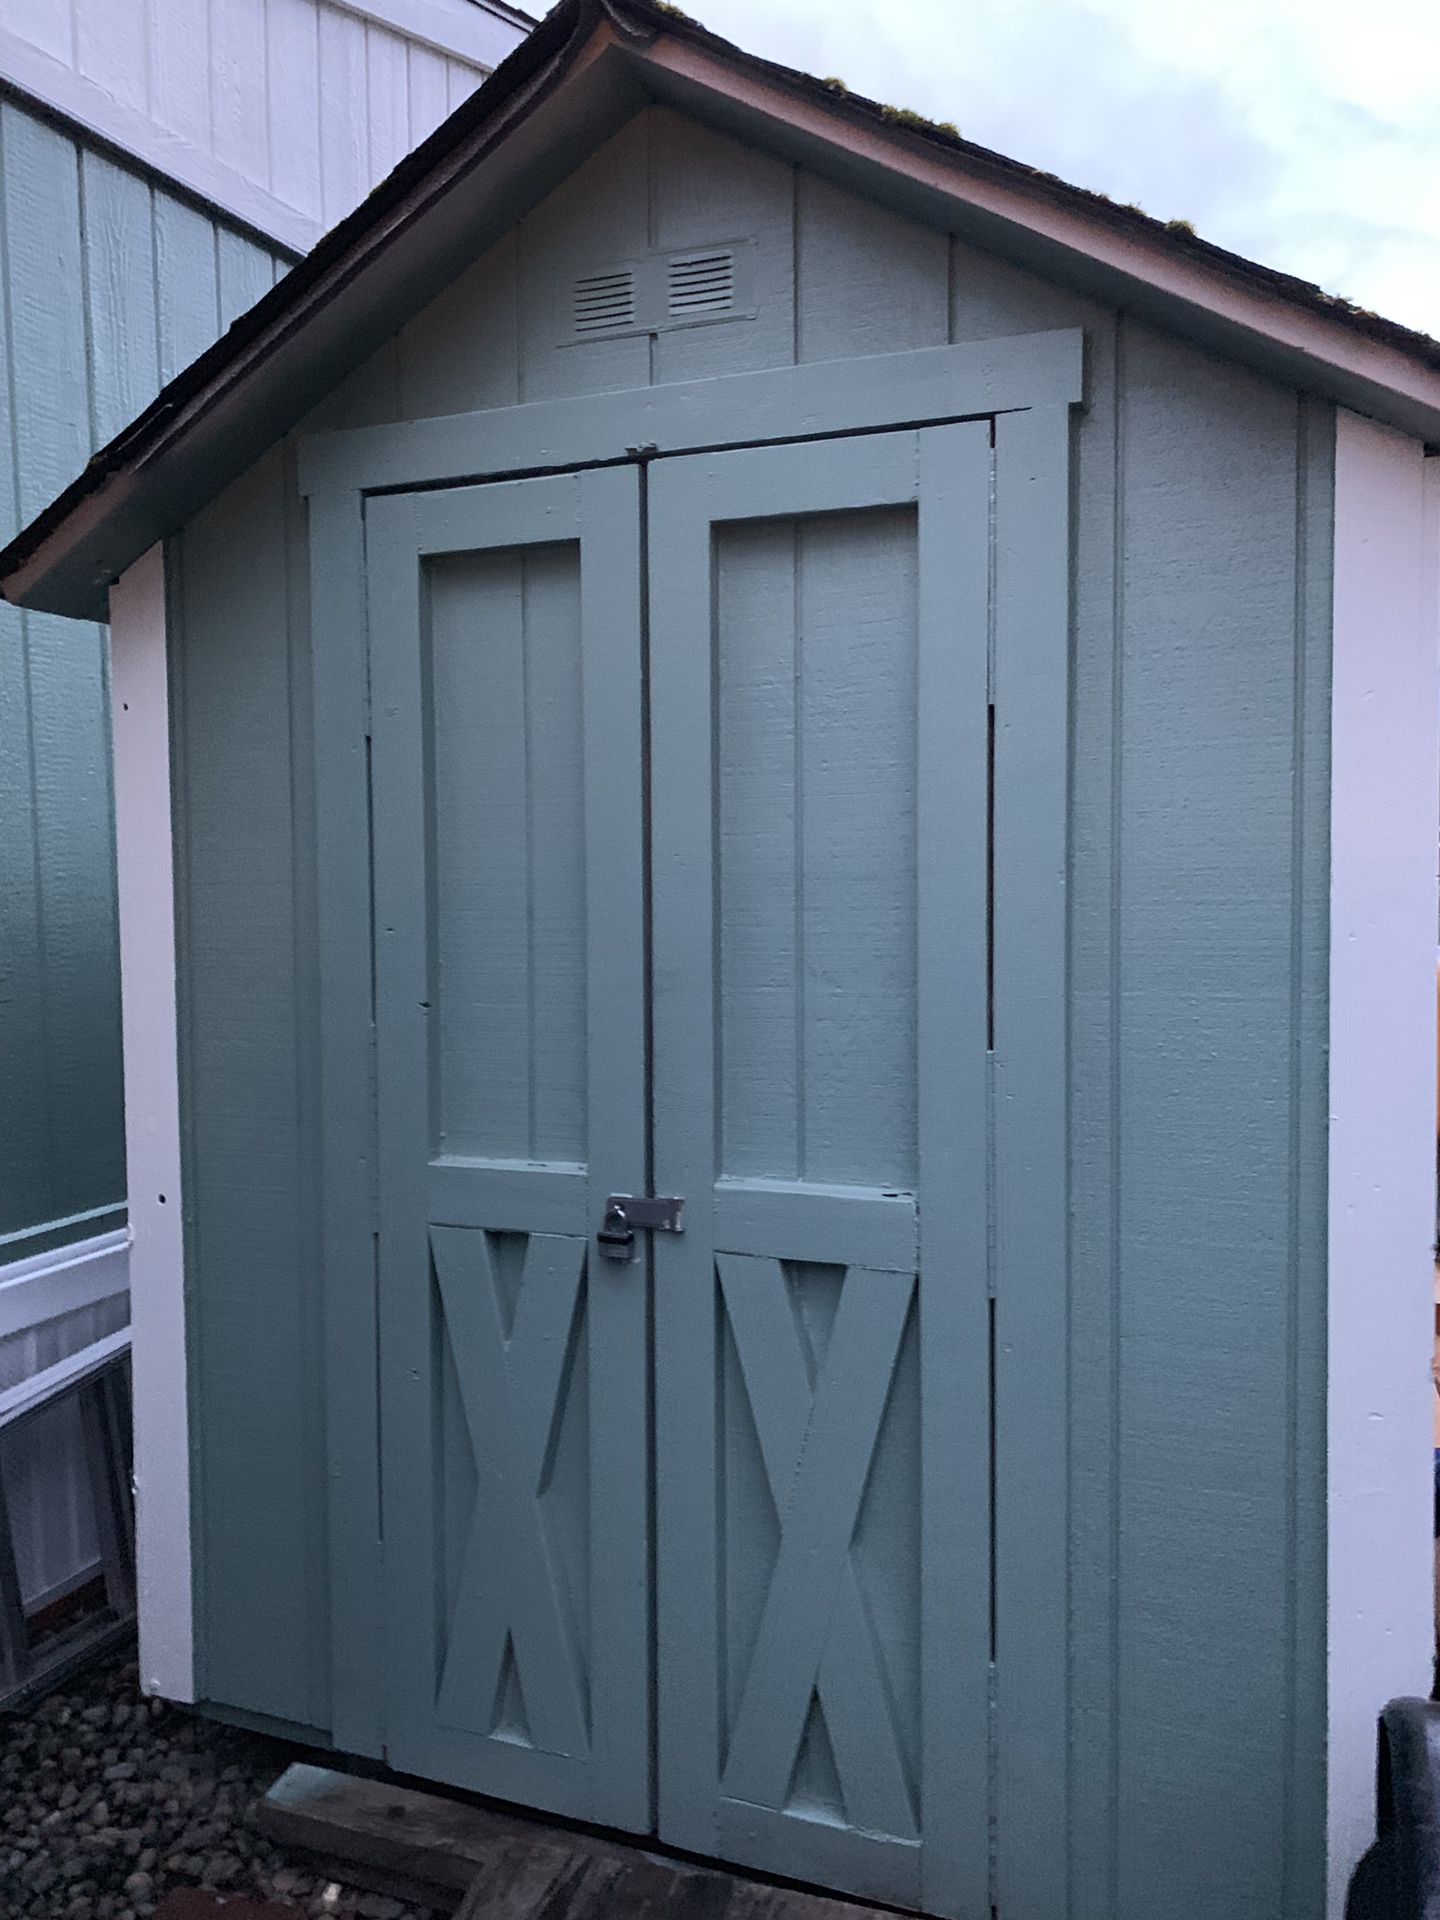 Wooden storage shed